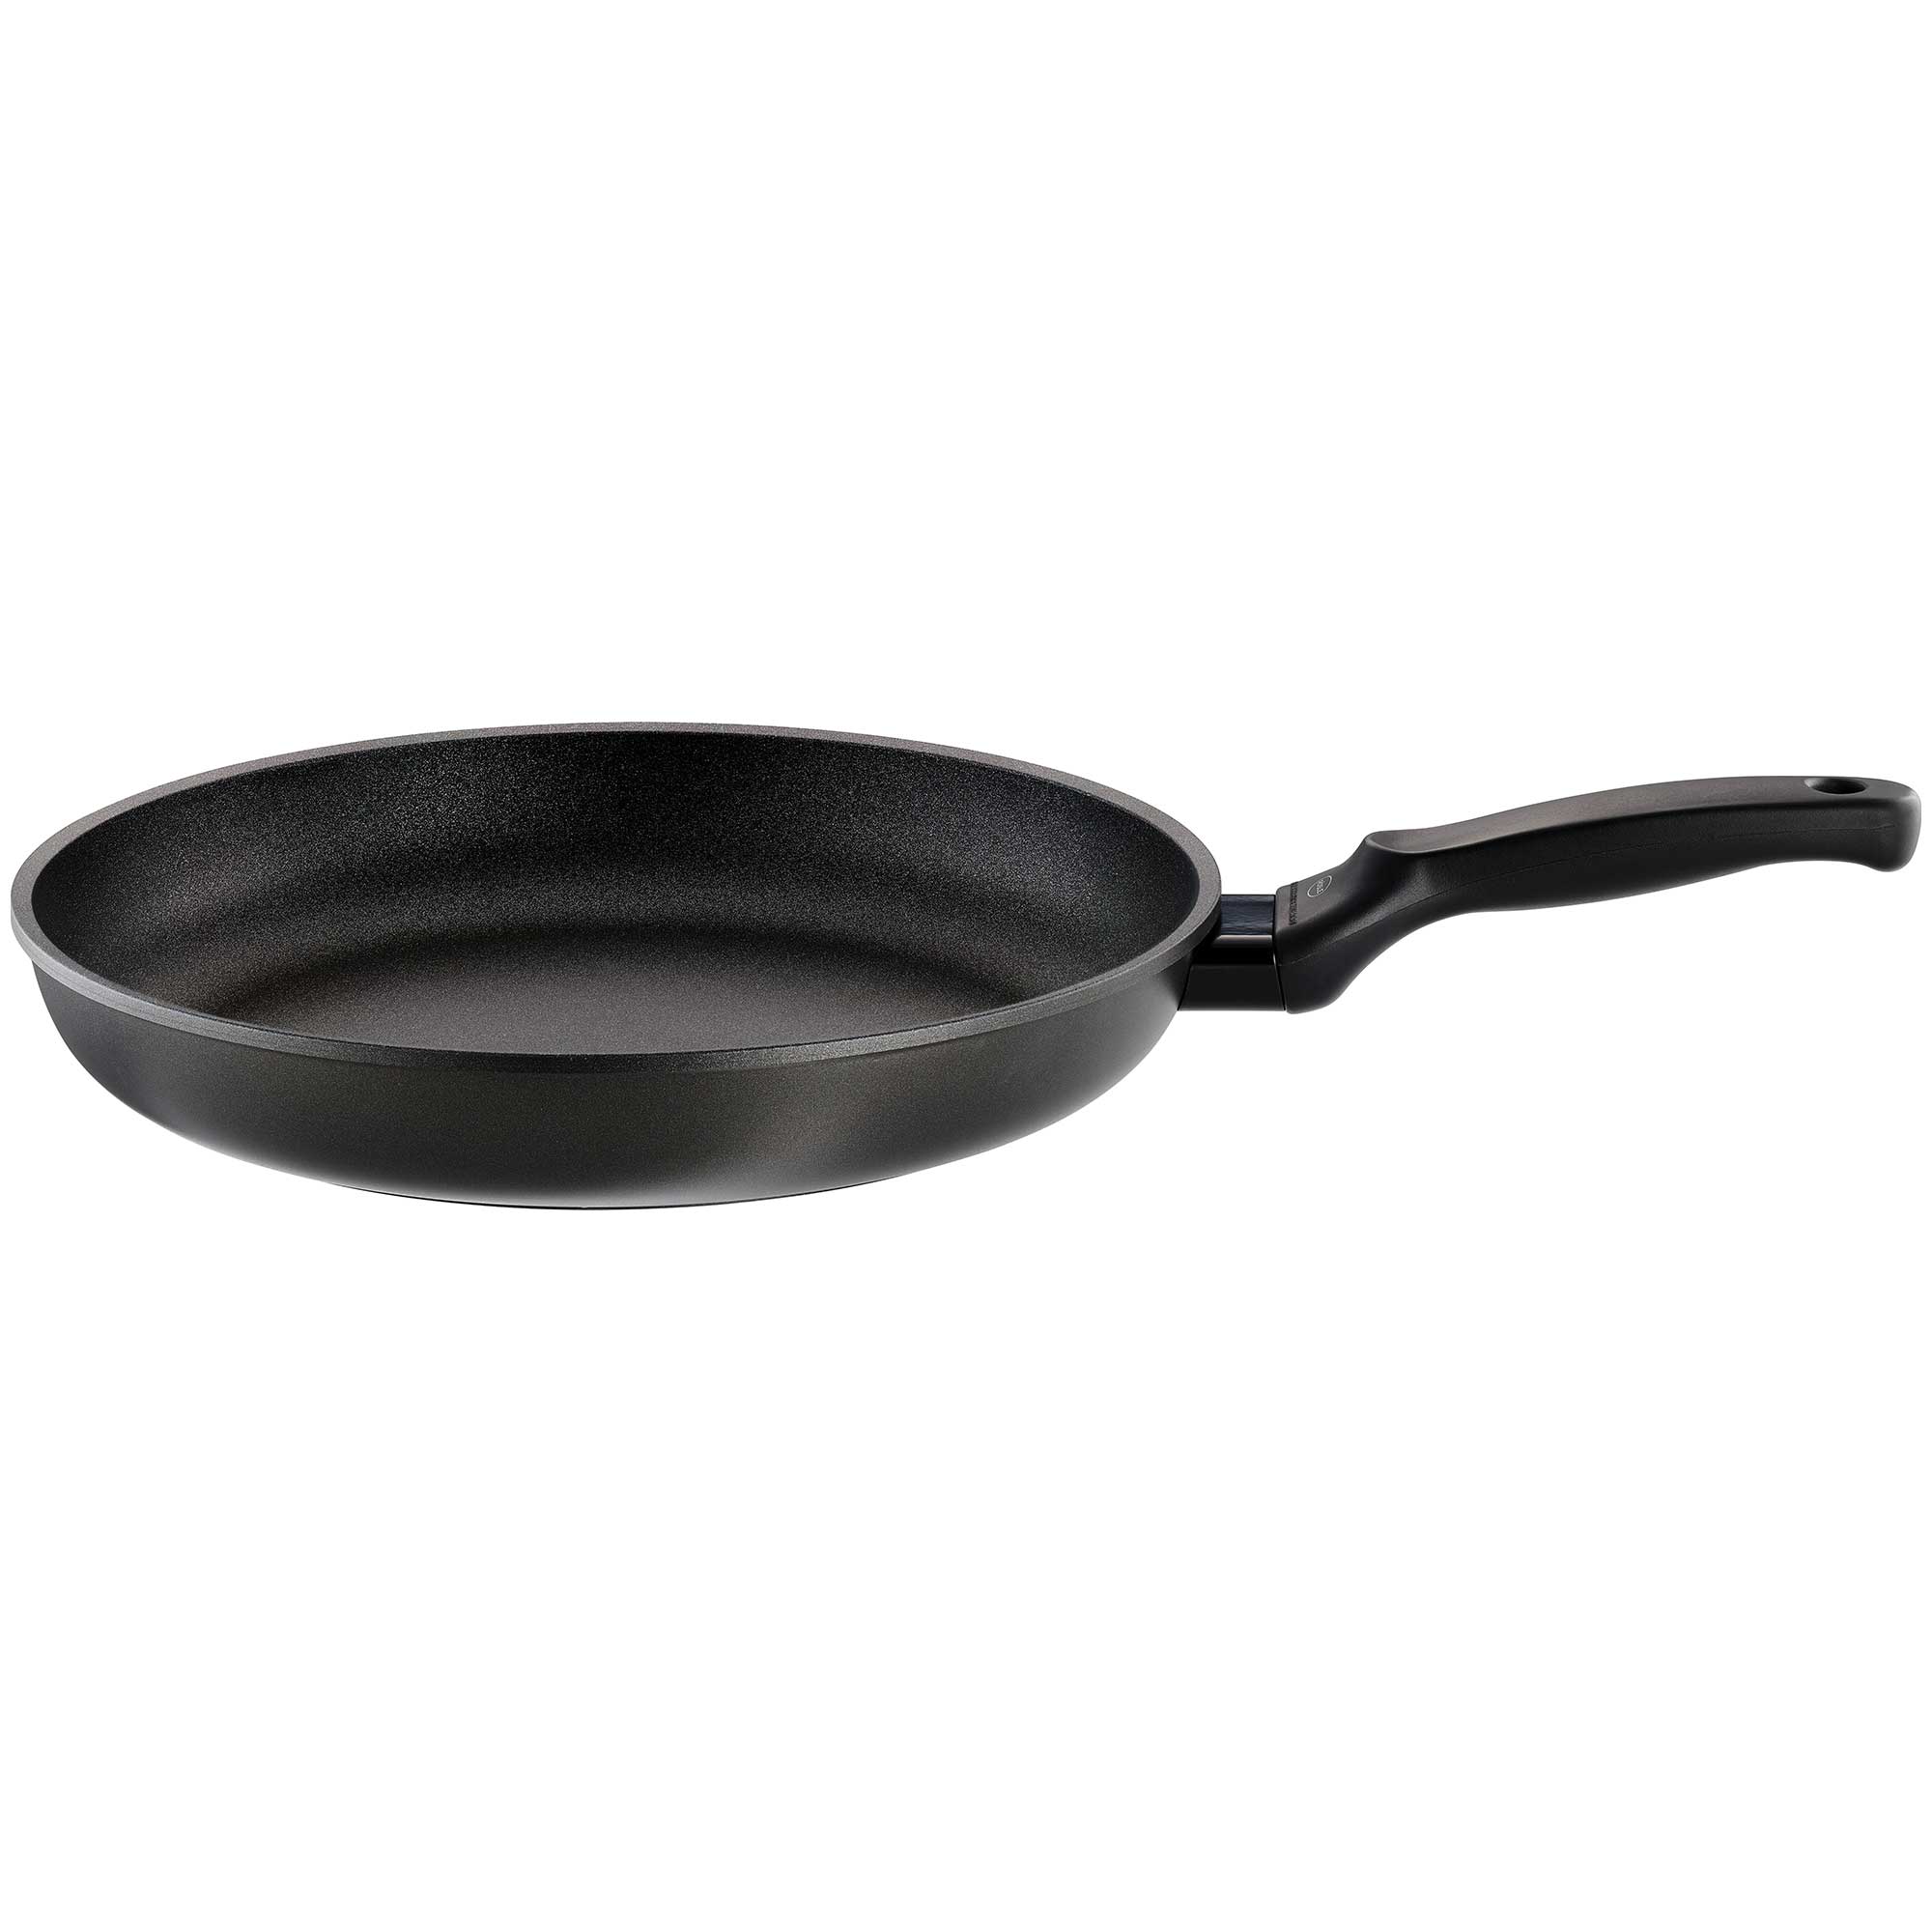 Frying Pan "Cadini" Ø 32 cm | 12.6 in. from cast aluminum with non-stick coating ProResist®